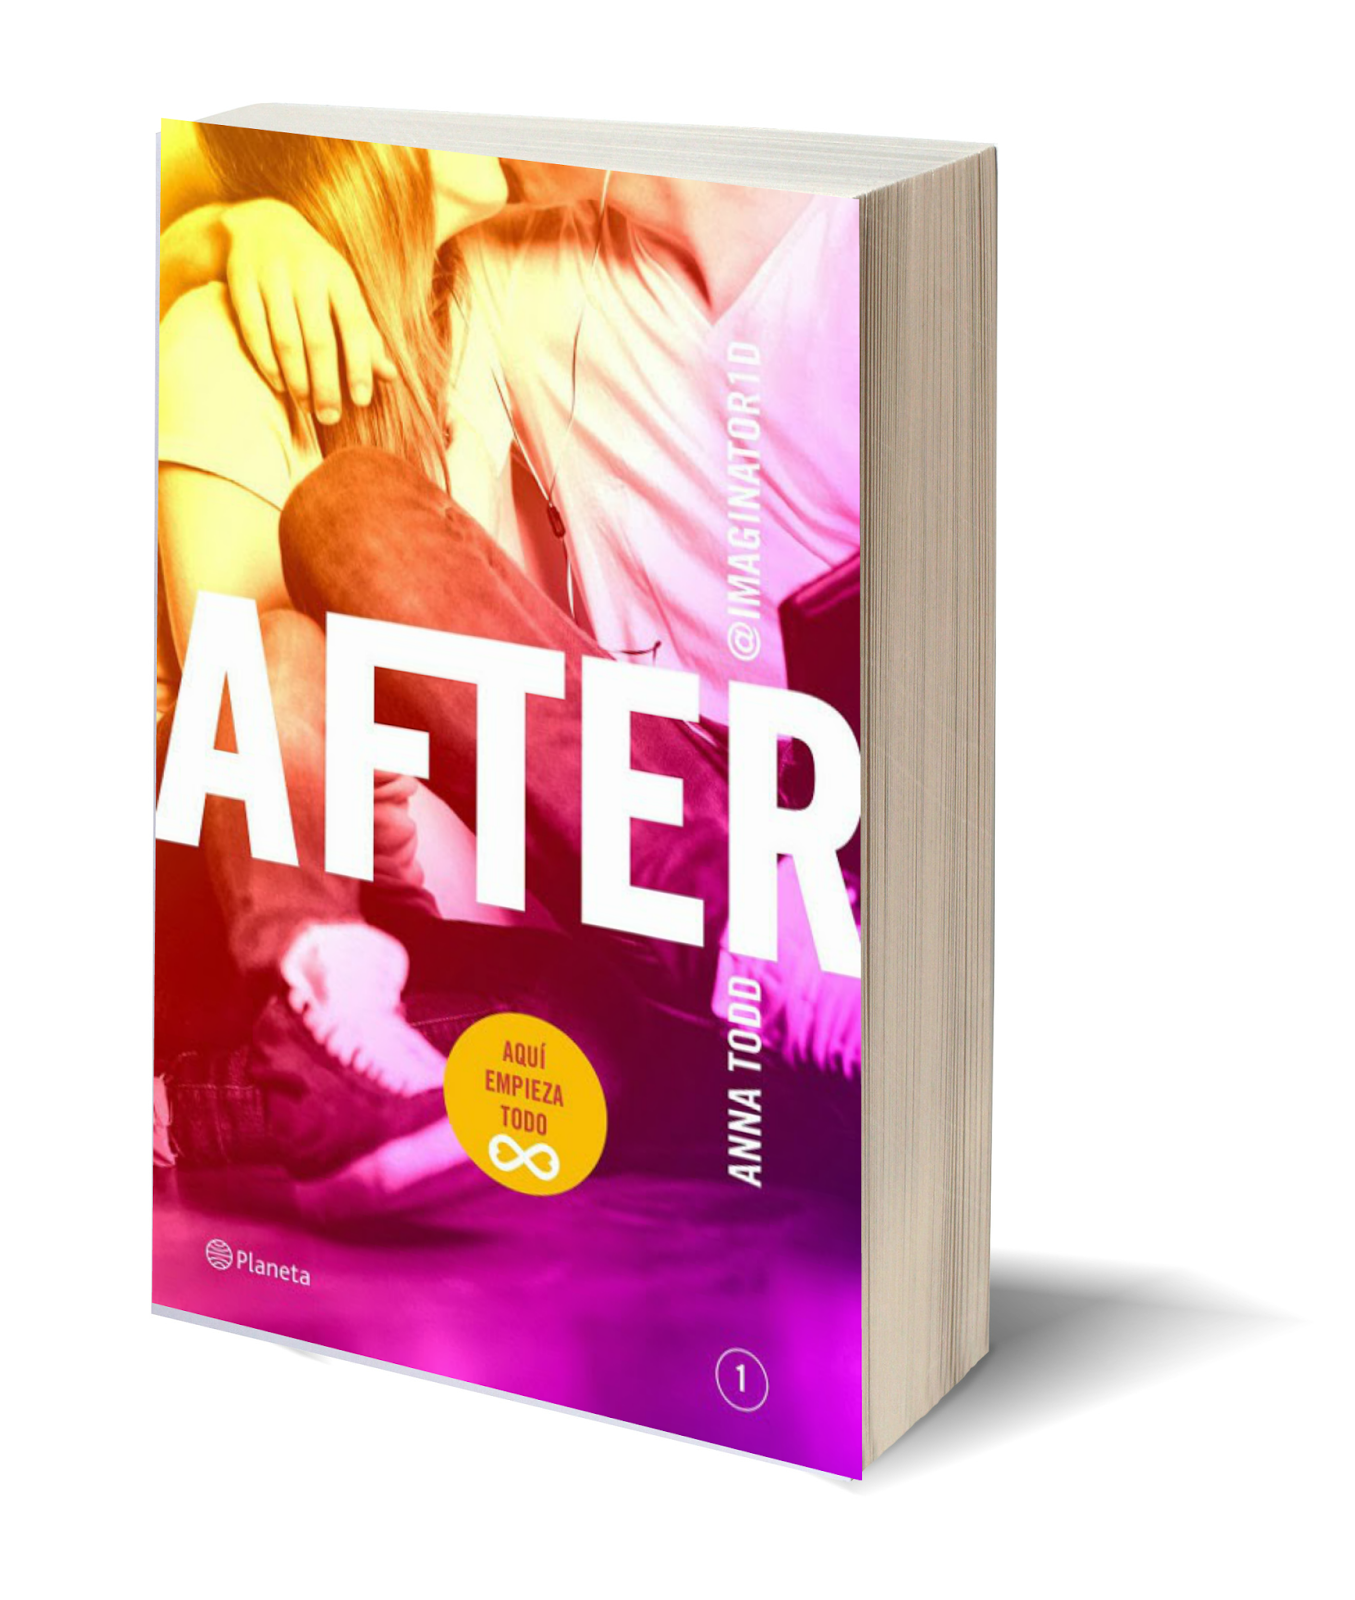 WorldOfBooks: After y After, en mil pedazos - Anna Todd